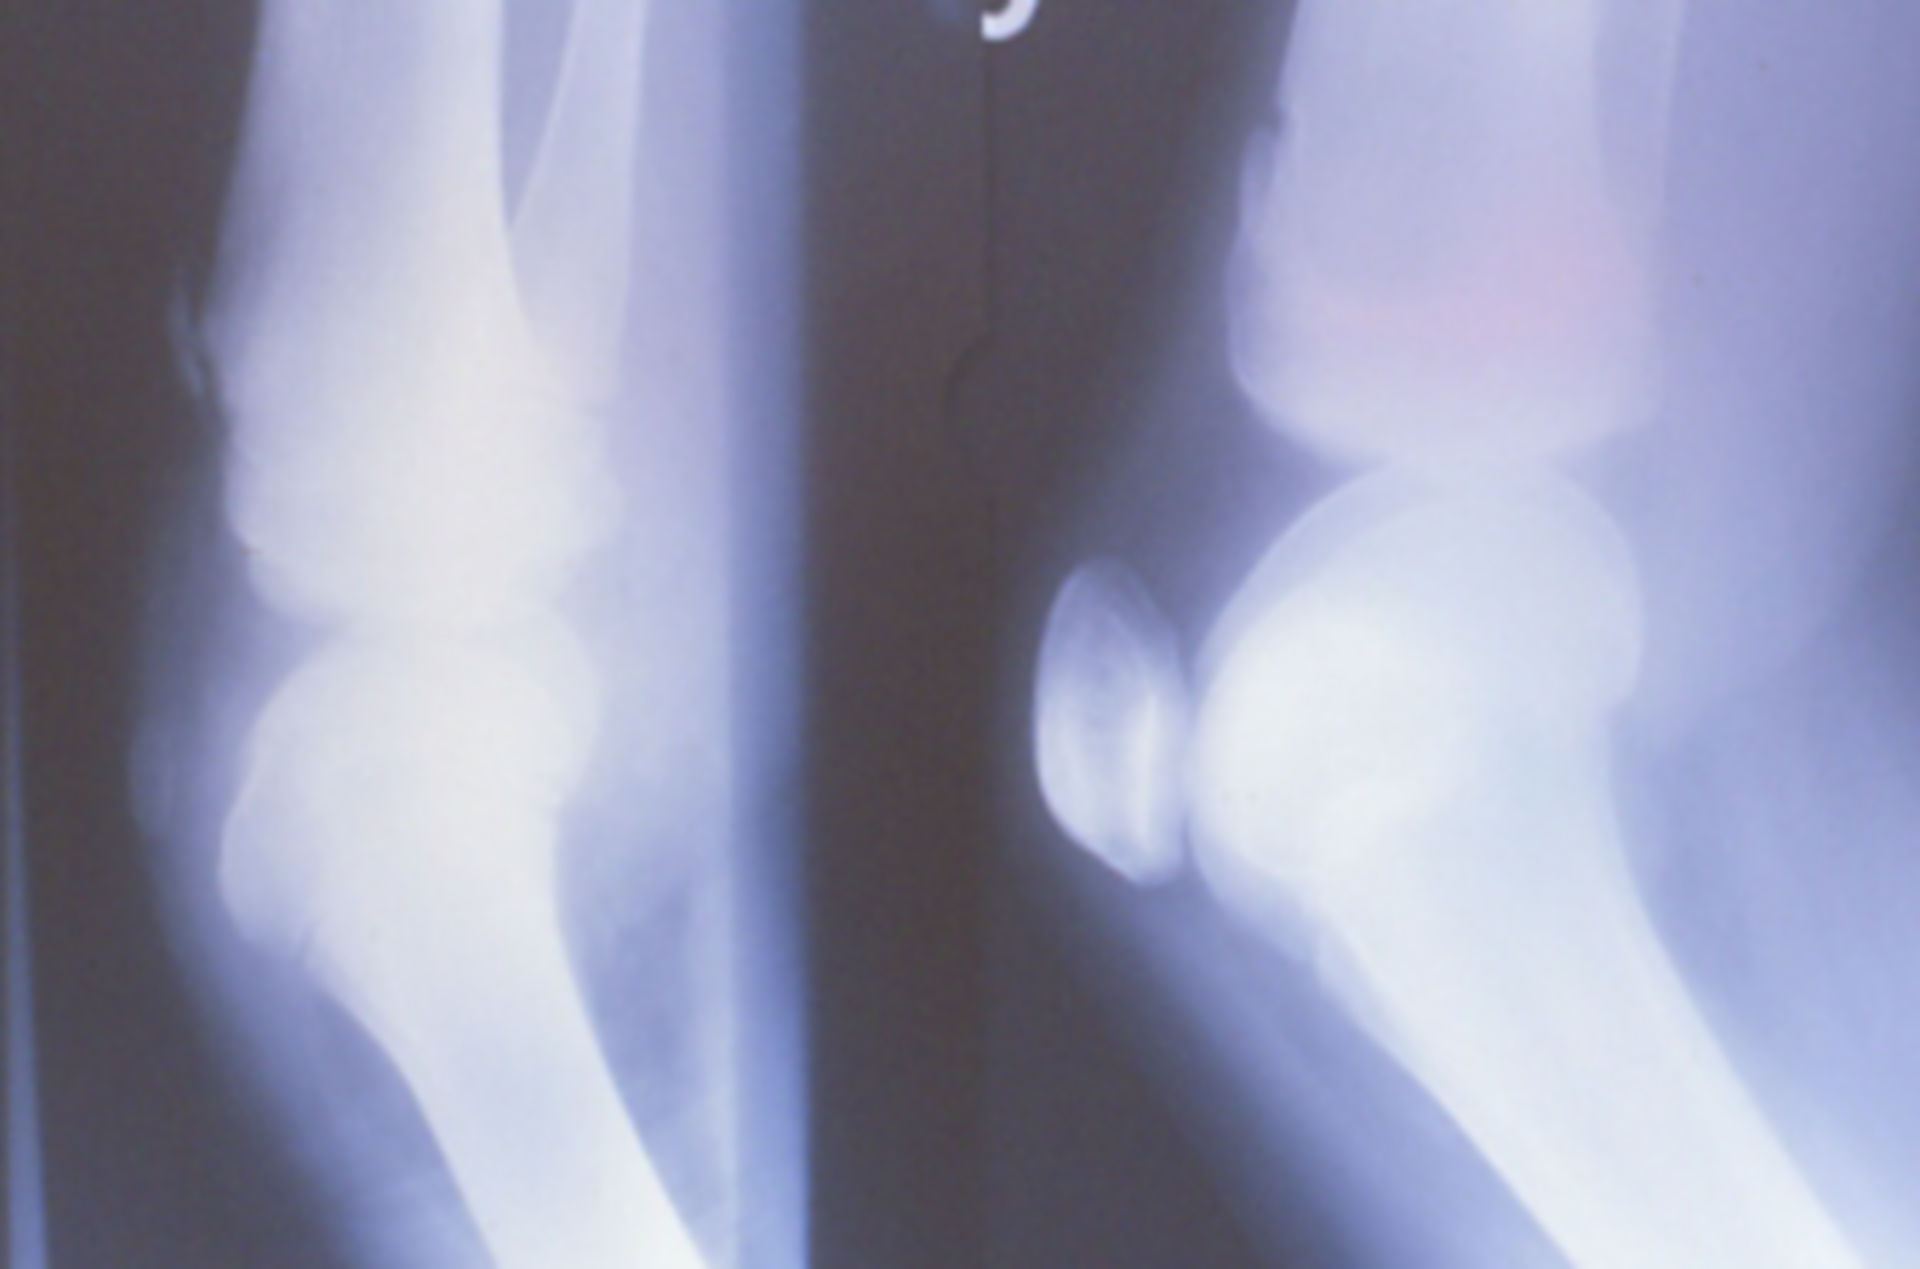 Radiological characteristics of the knee joint in nail patella syndrome